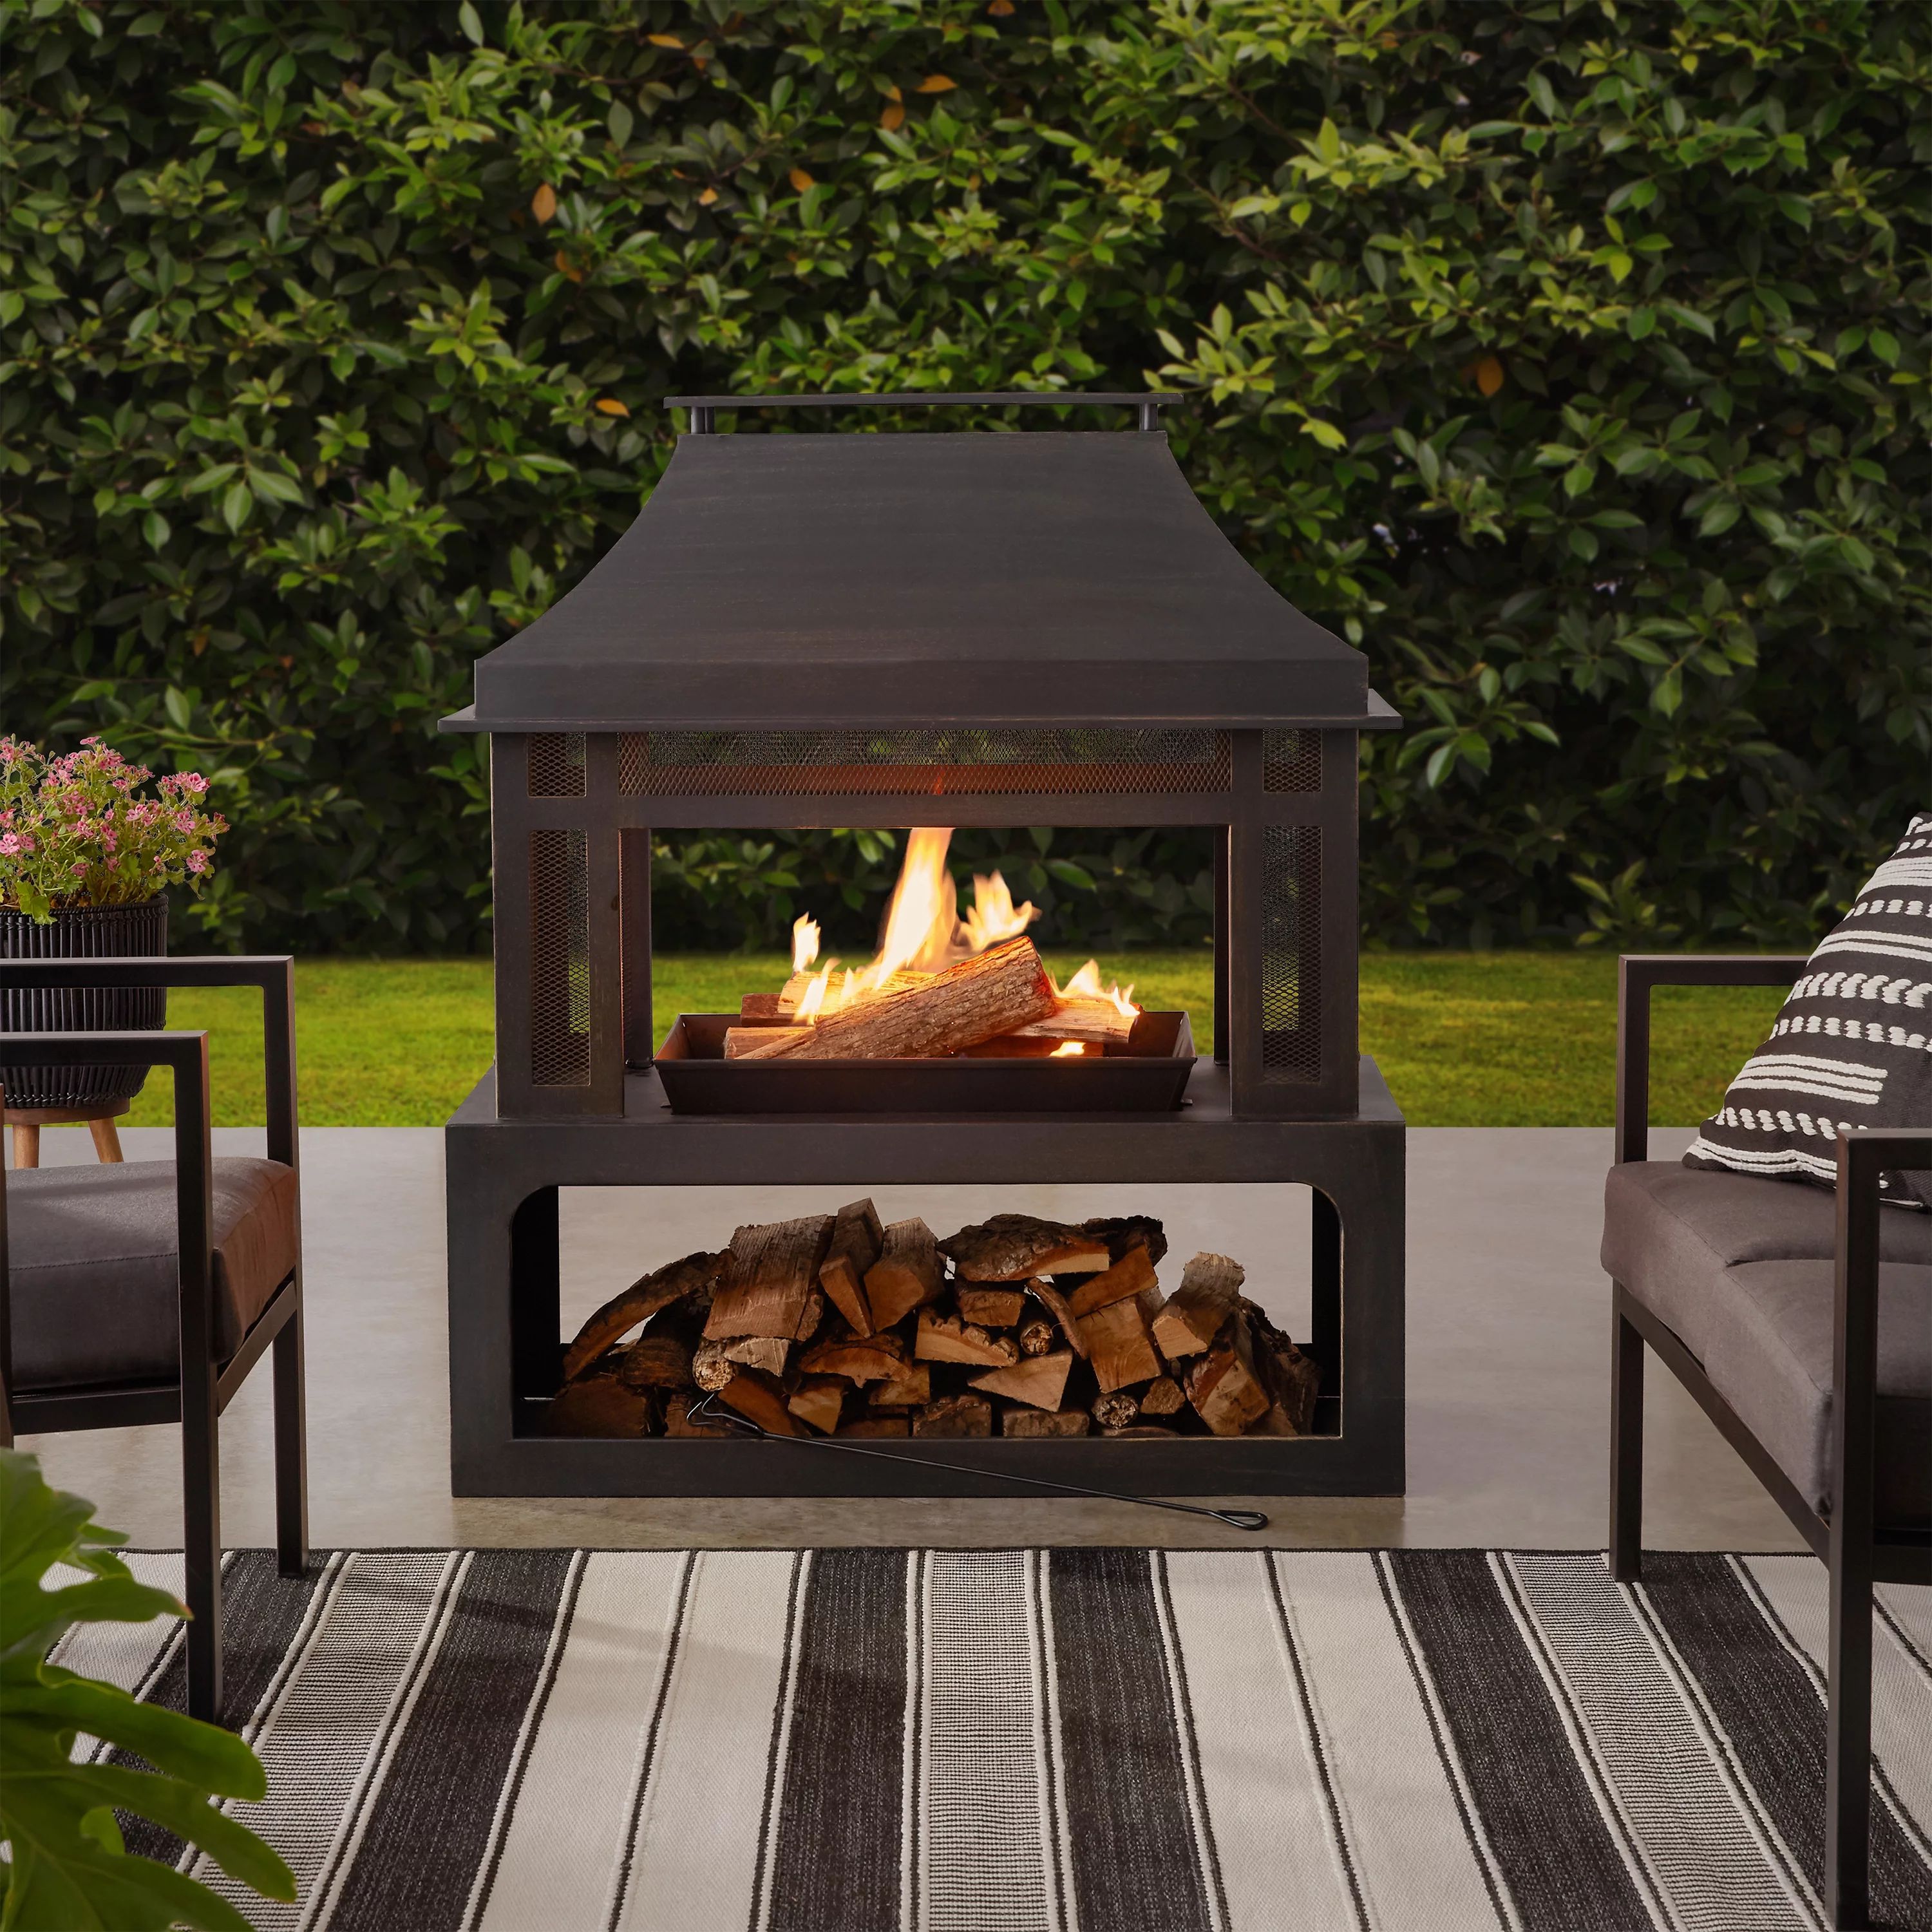 Mainstays 45-Inch Outdoor Steel Fireplace with Chimney | Walmart (US)